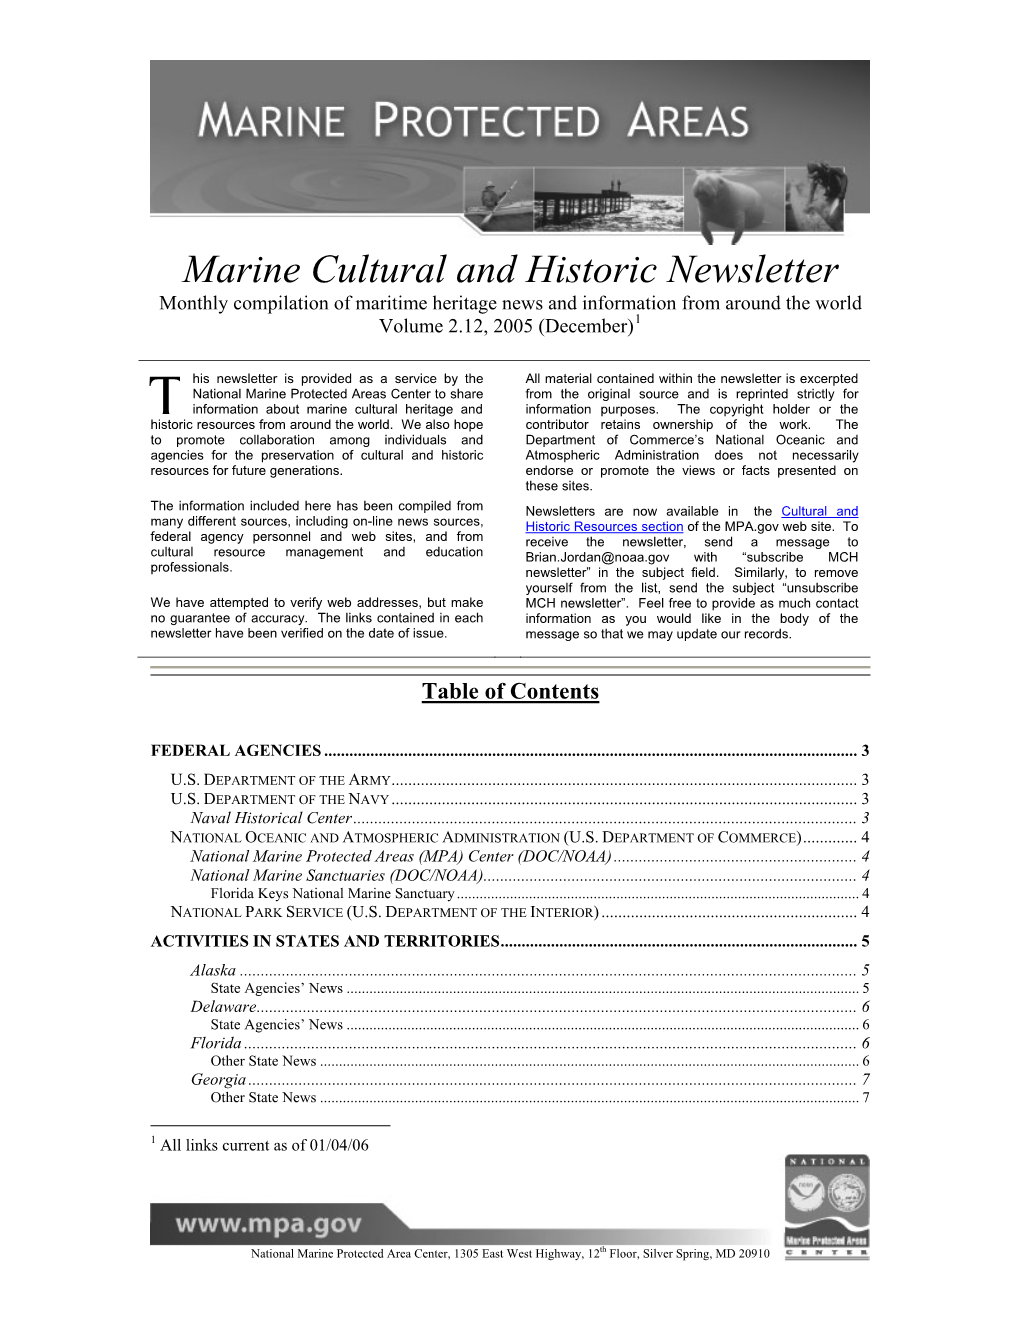 Marine Cultural and Historic Newsletter Vol 2(12): December